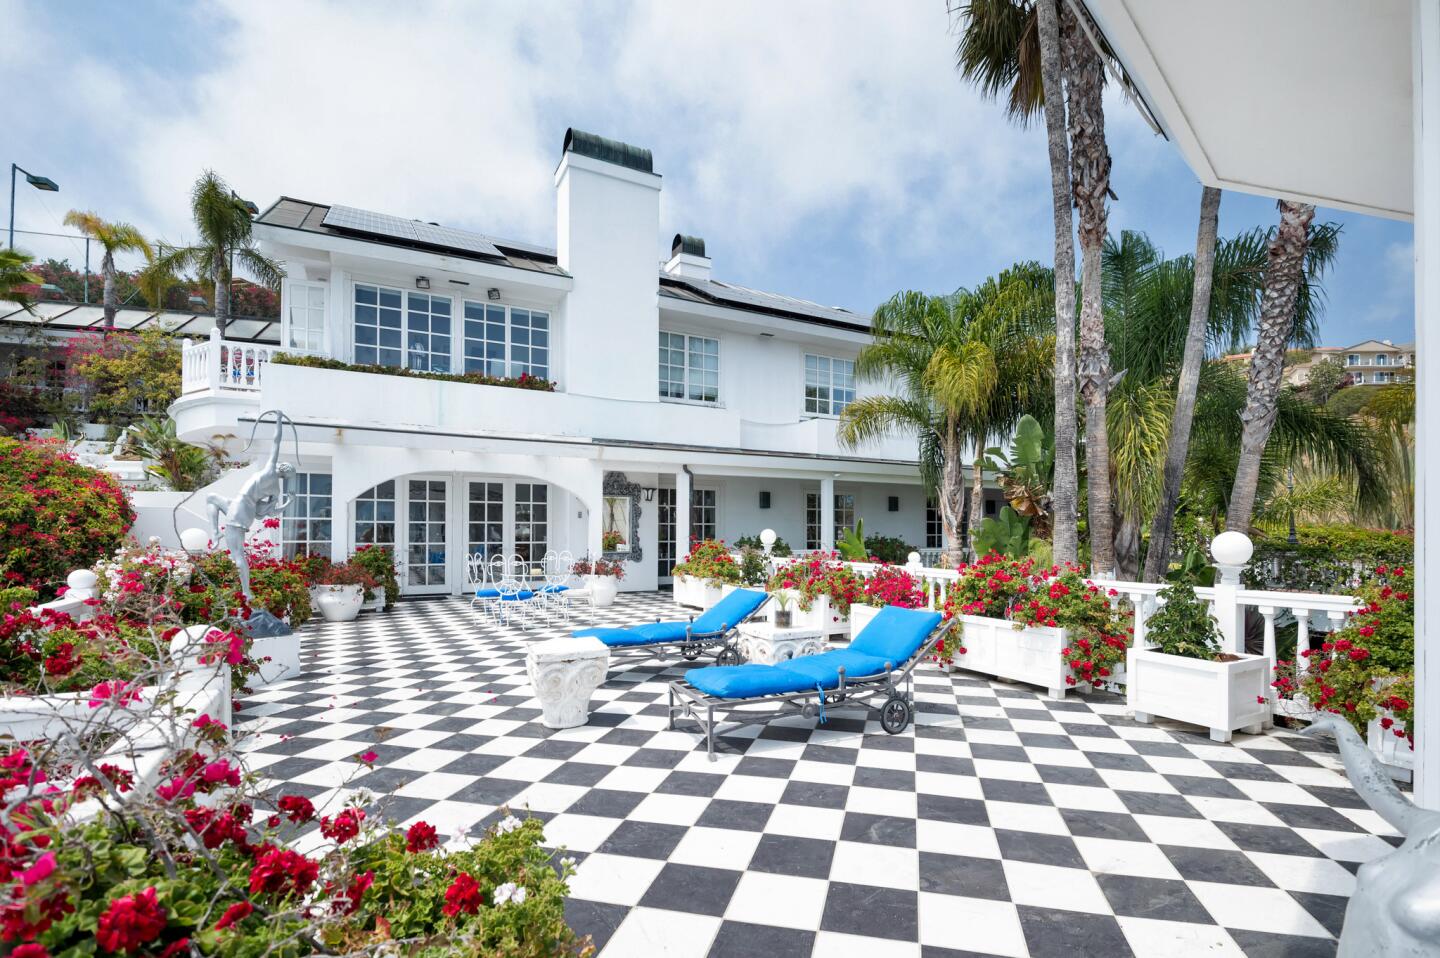 Home of the Day: Resort-style living in Malibu